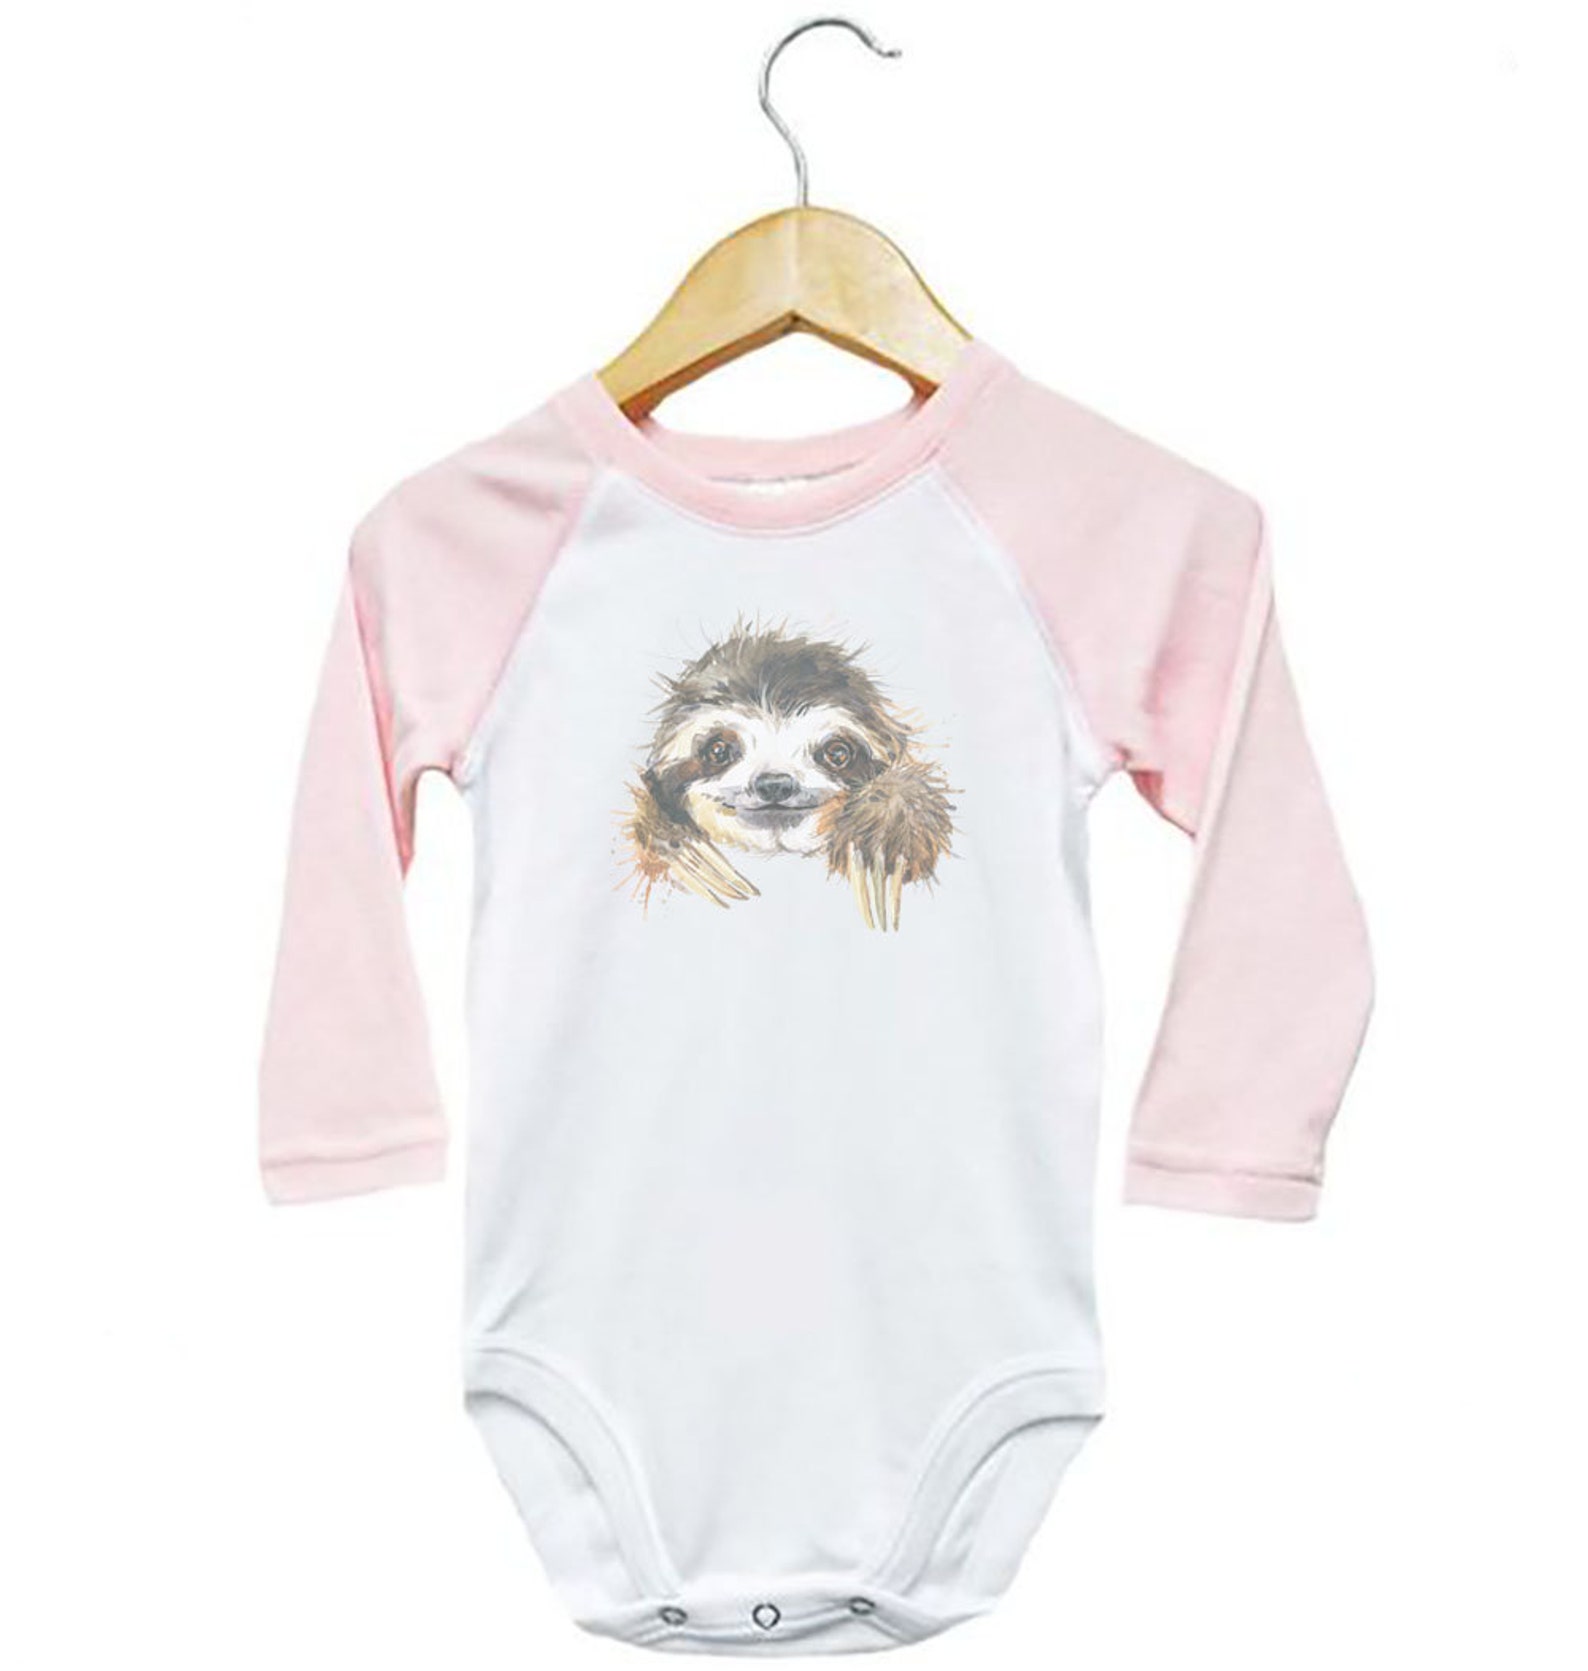 Sloth Onesie Sloth Baby Sloth Outfit Sublimation Onesie | Etsy